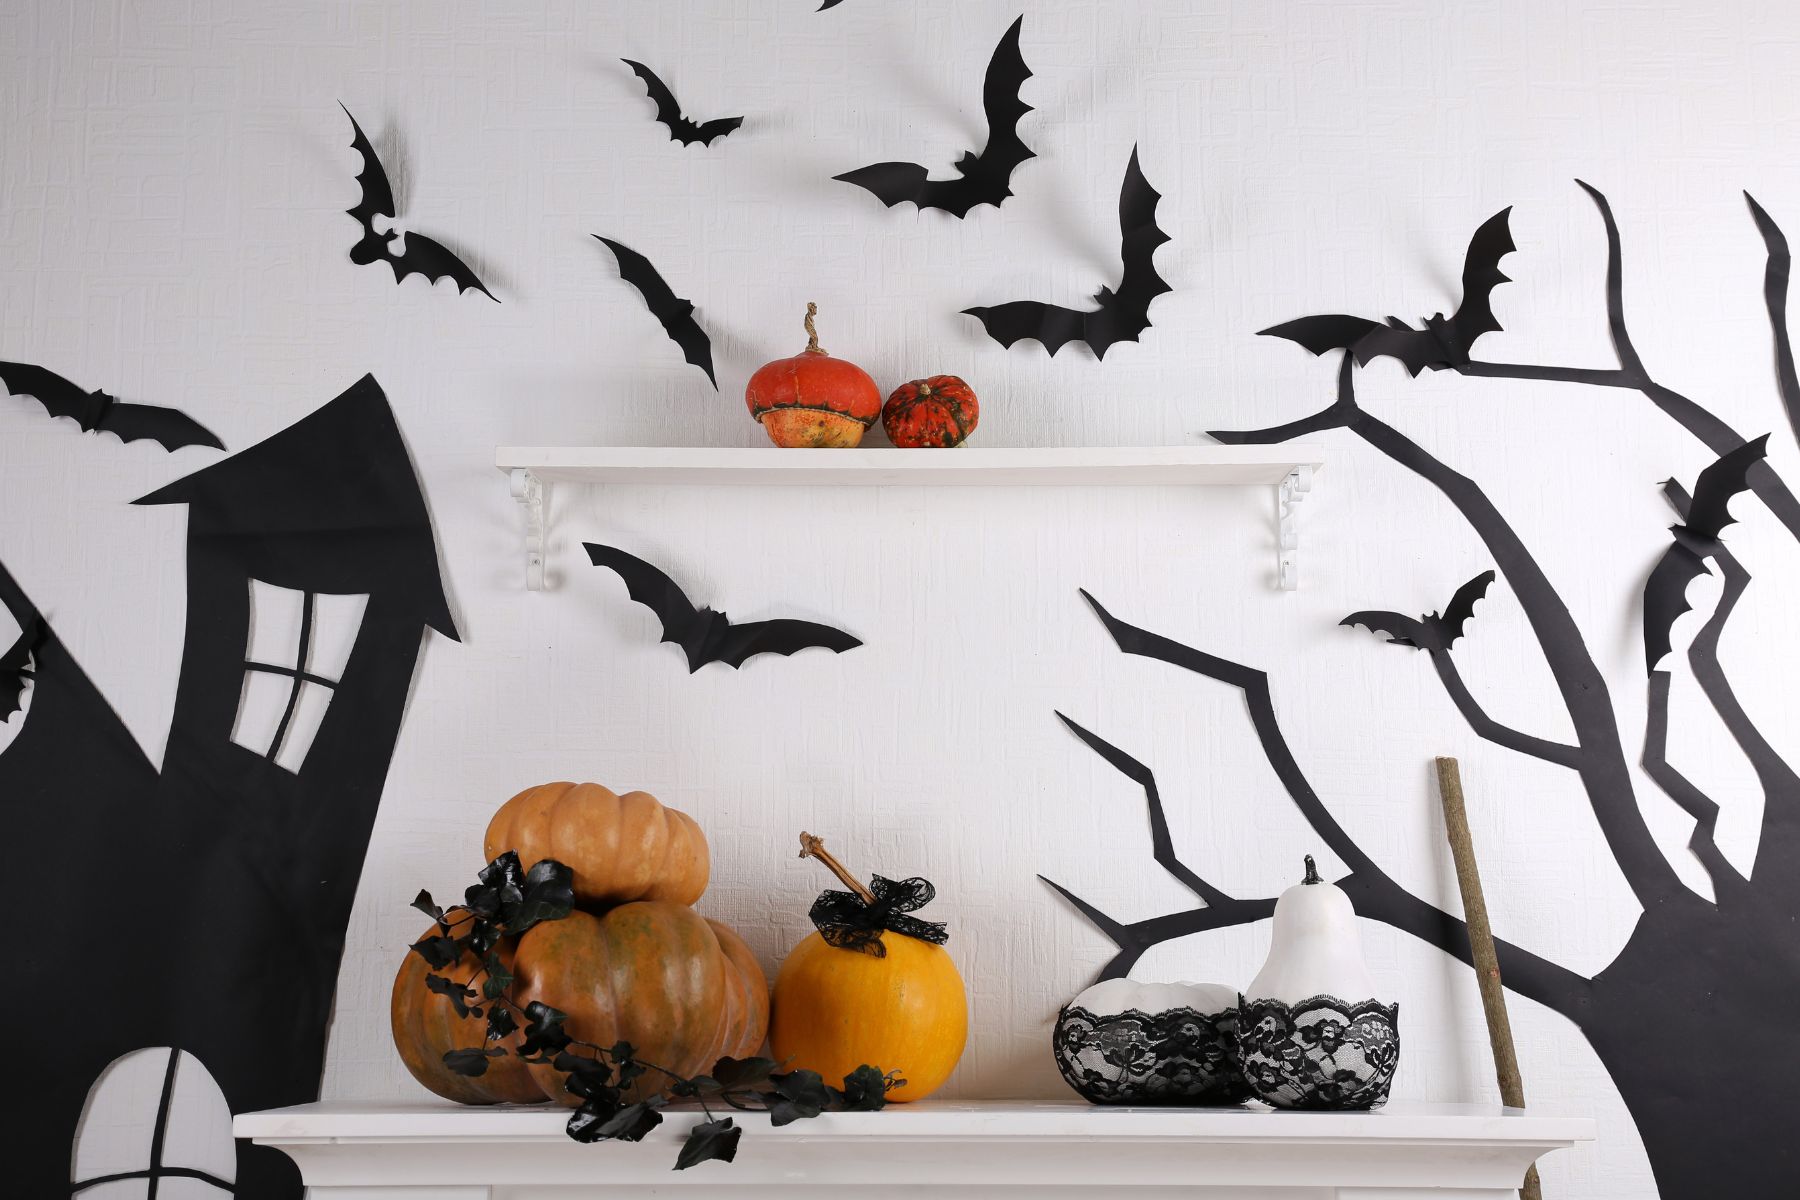 Decorate Your Home With Spooky Decorations